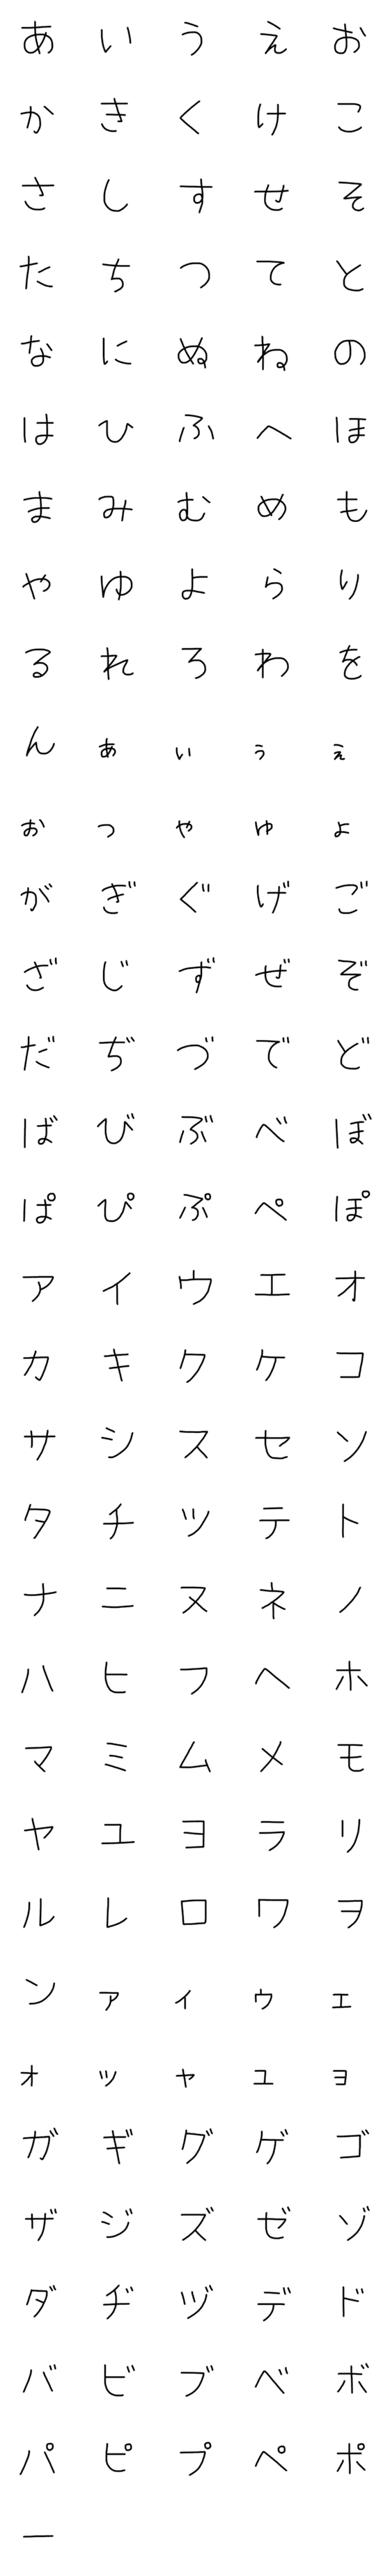 [LINE絵文字]ひらがなの画像一覧